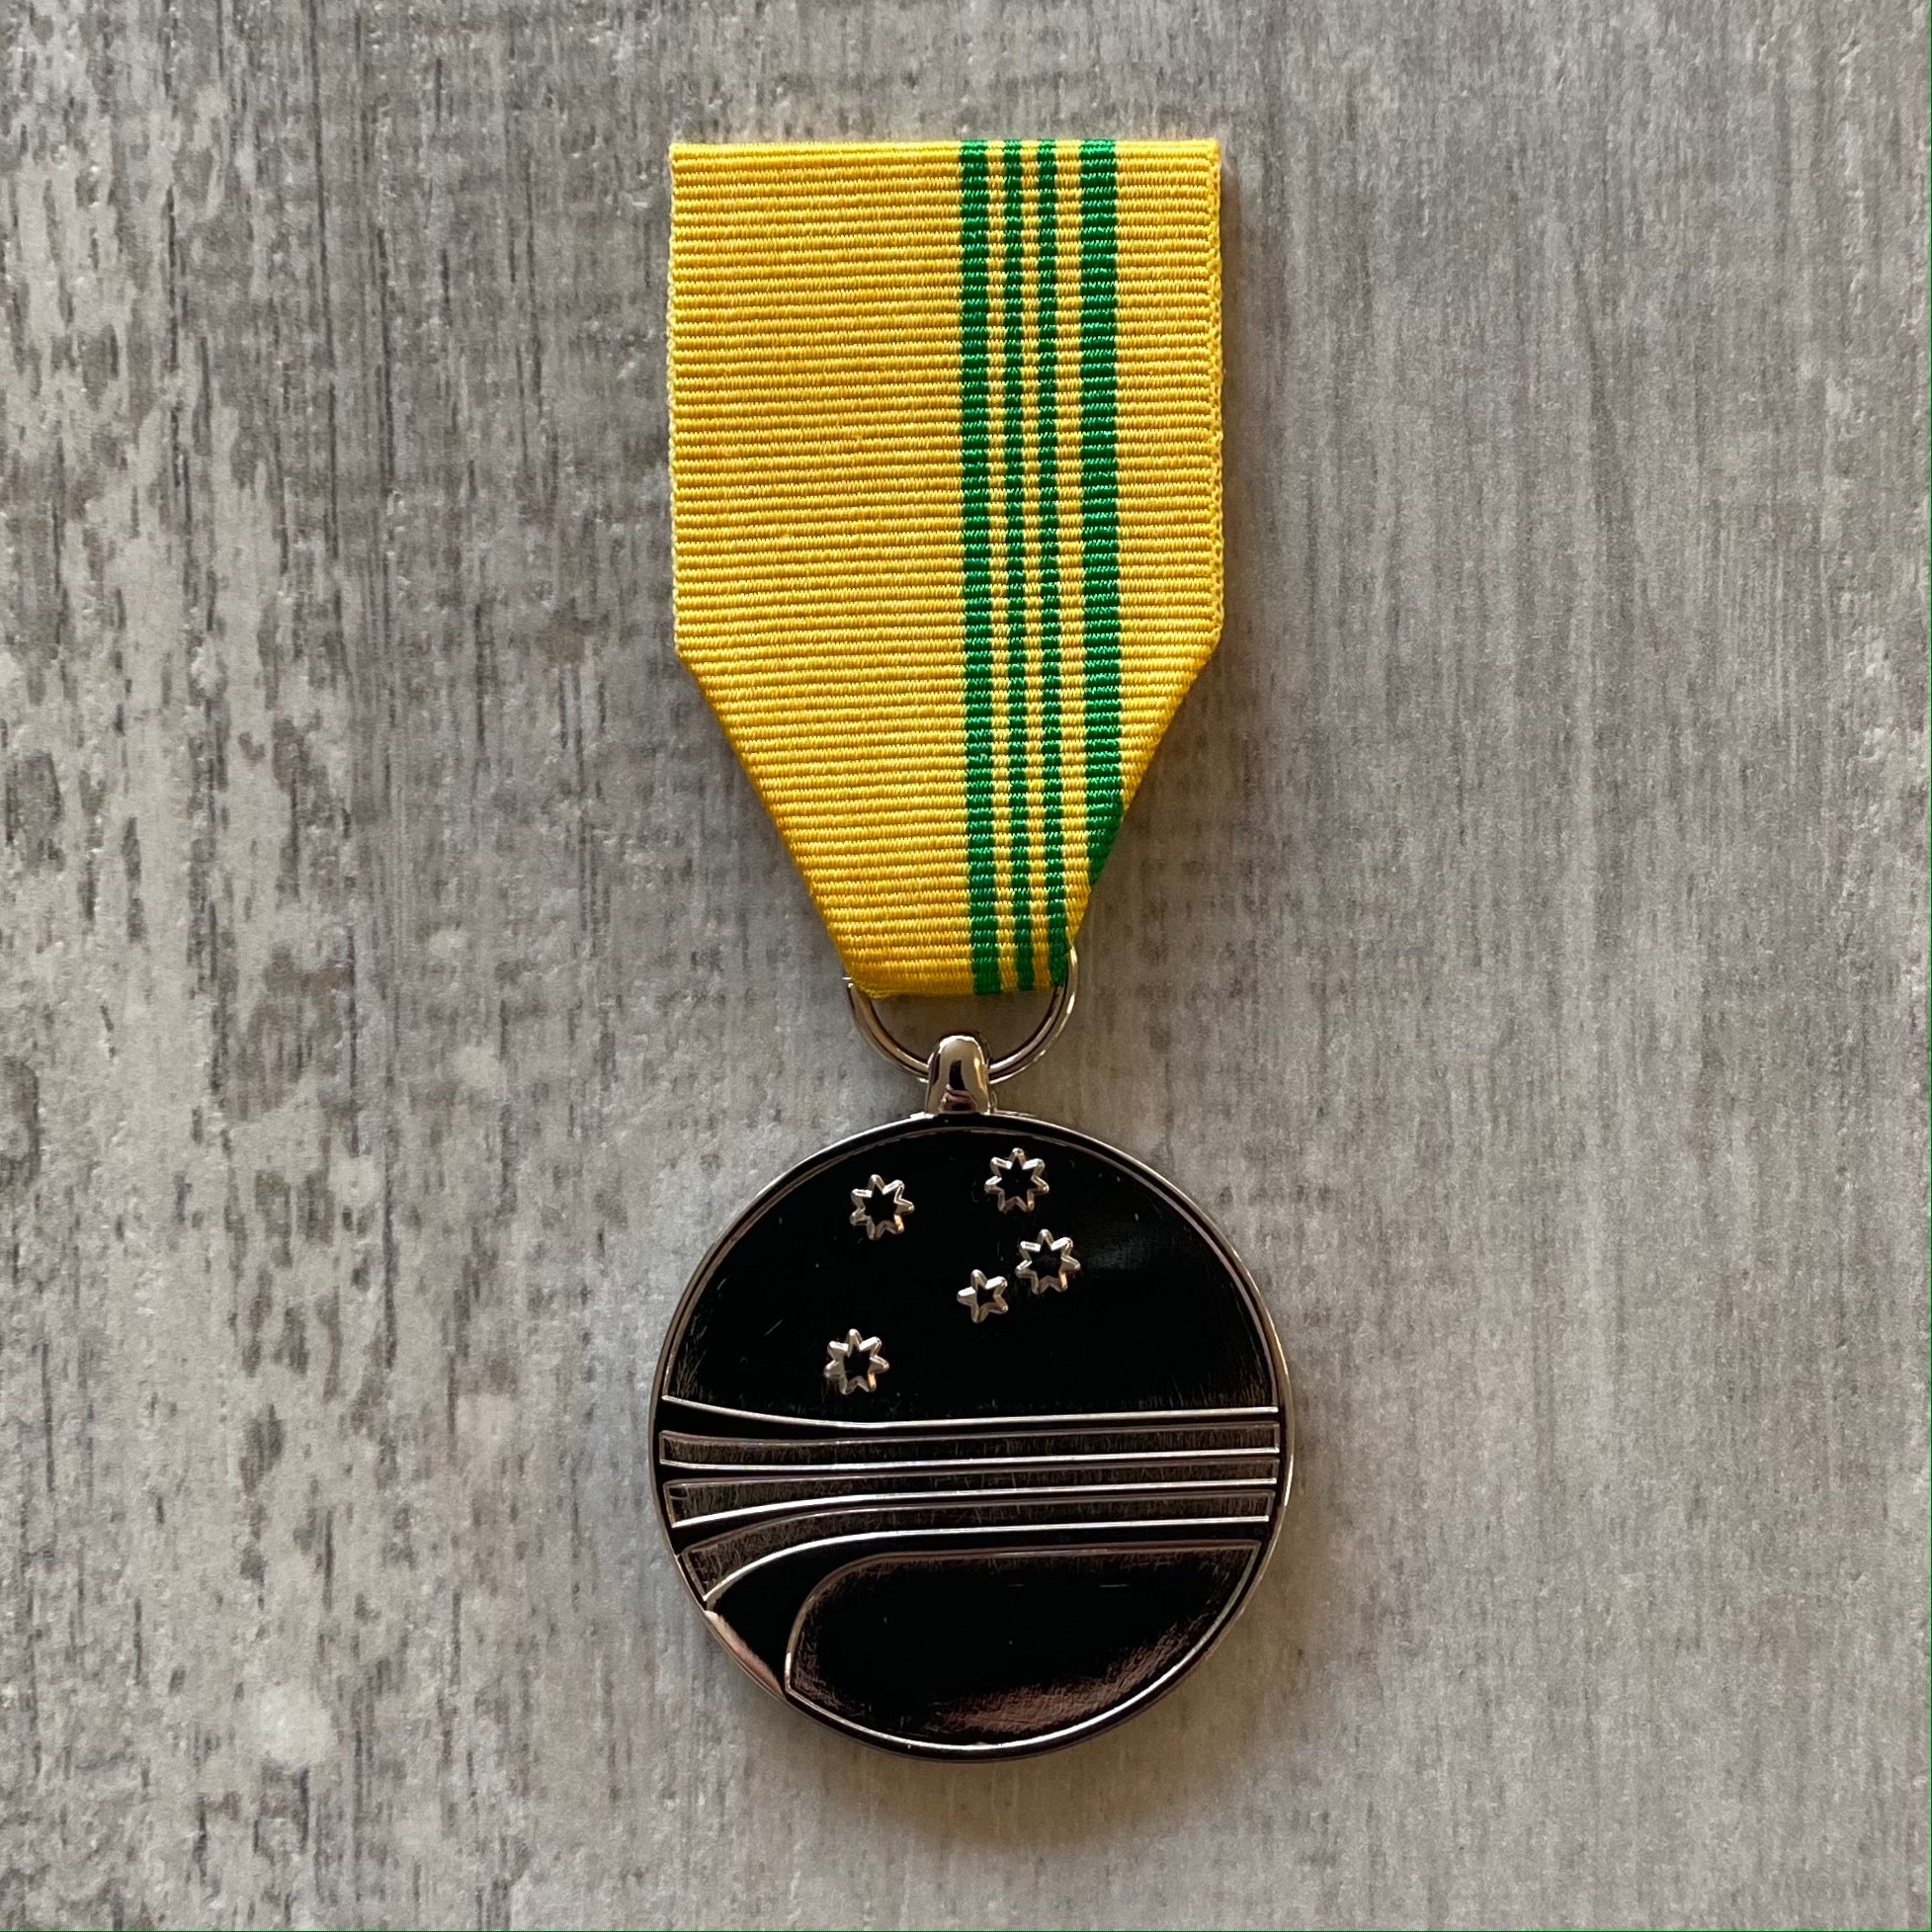 Australian Sports Medal - Foxhole Medals